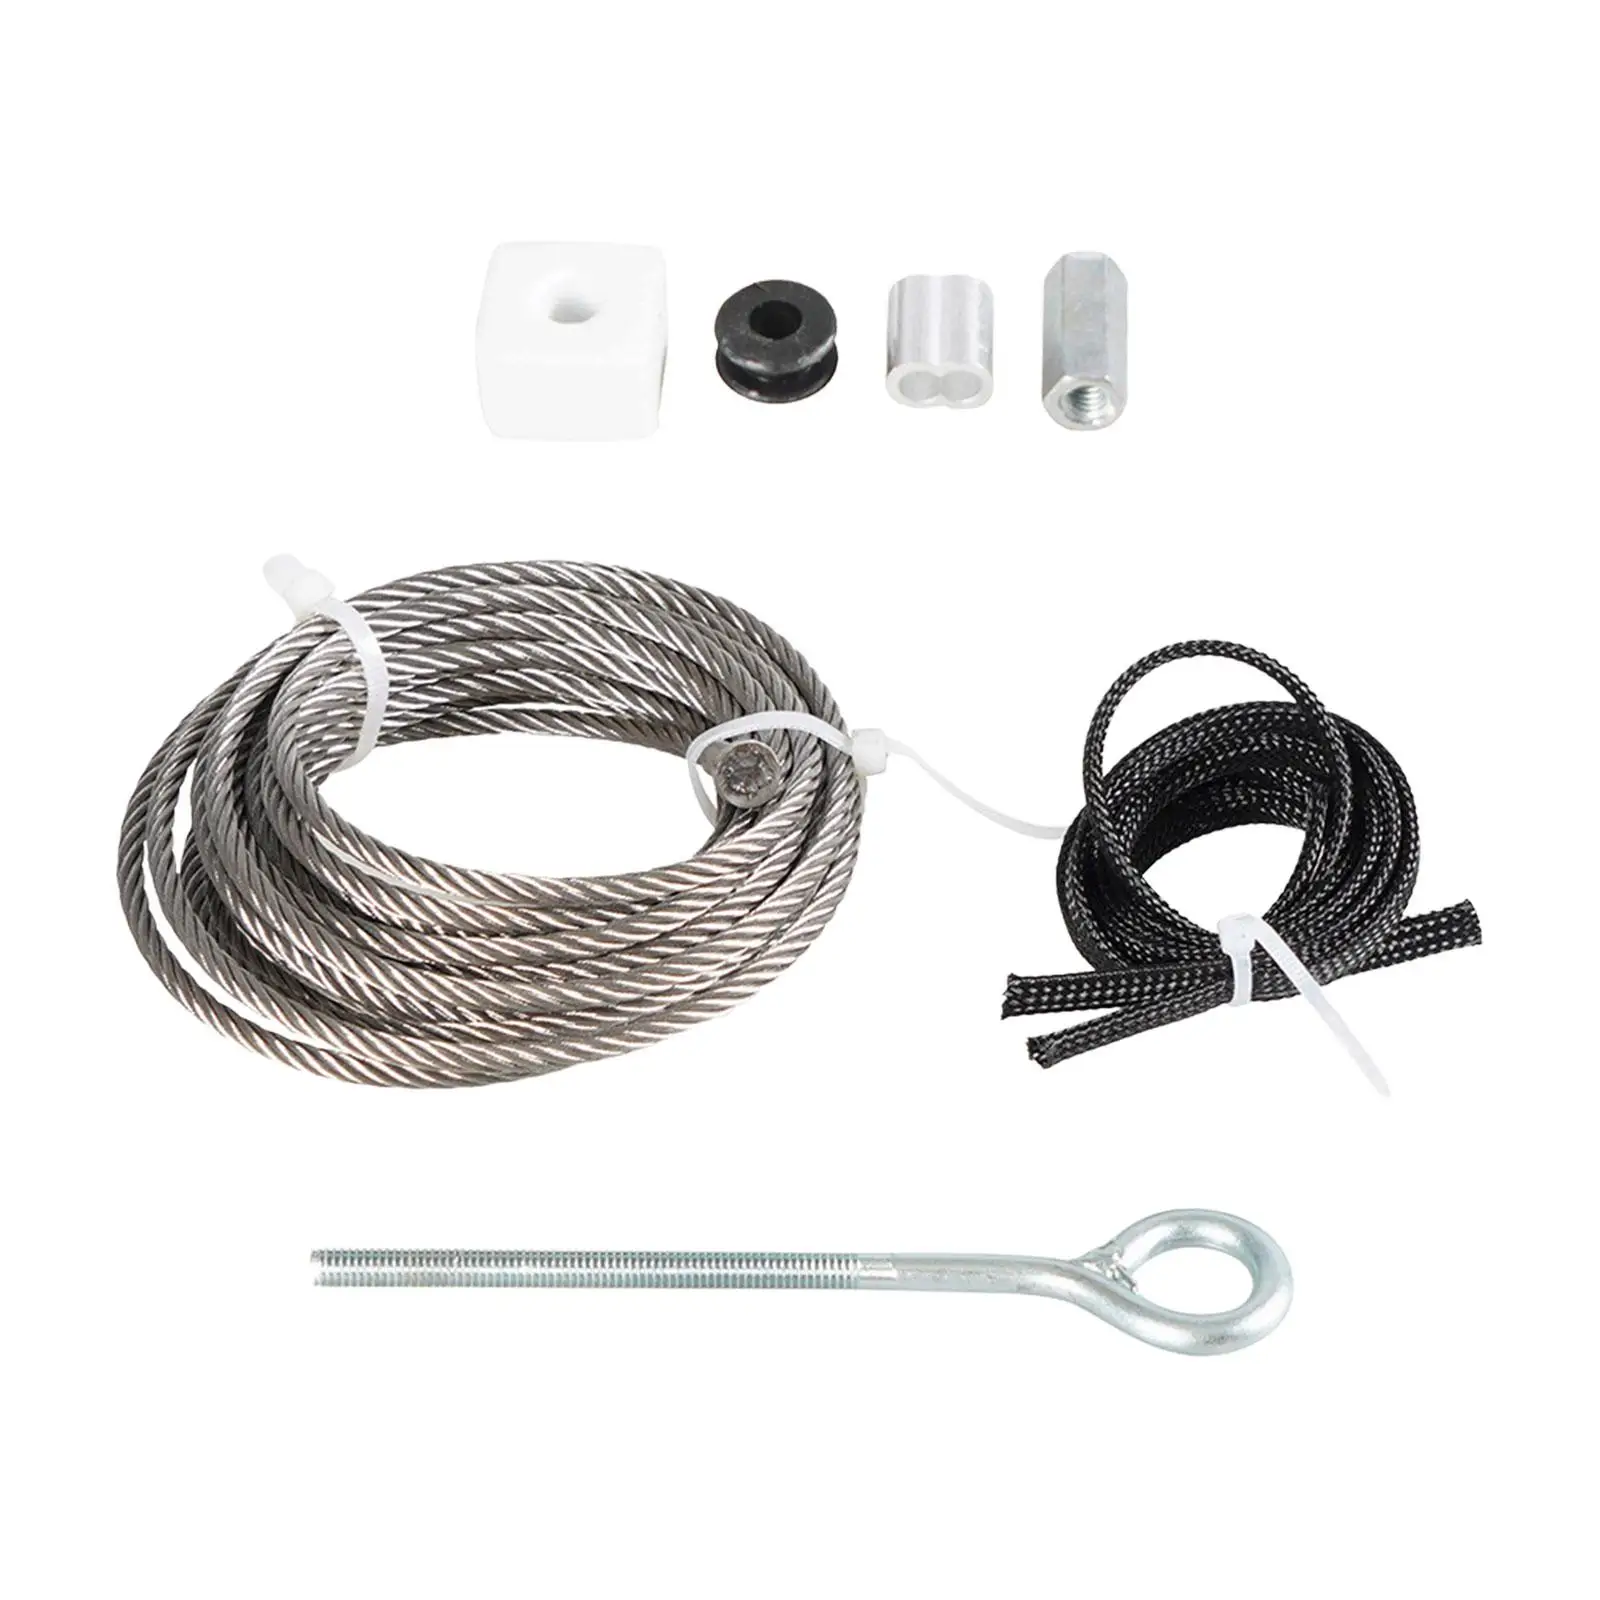 RV Cable Repair Set Easy to Install Assembly 22305 for Accuslide System